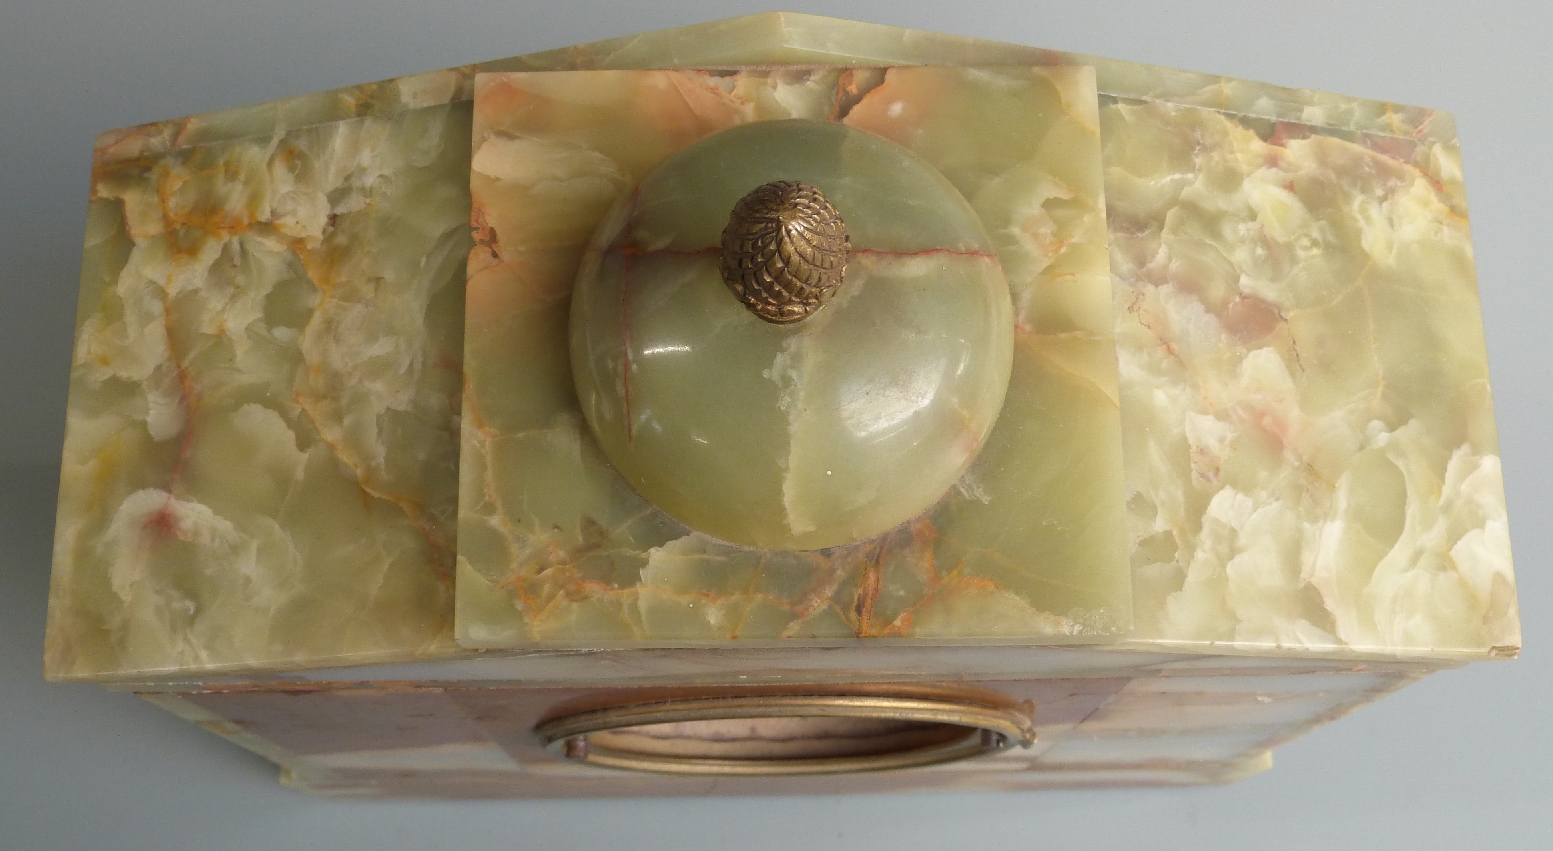 Late 19th/ early 20thC French architectural green onyx mantel clock, the numbered movement by Japy - Image 4 of 5